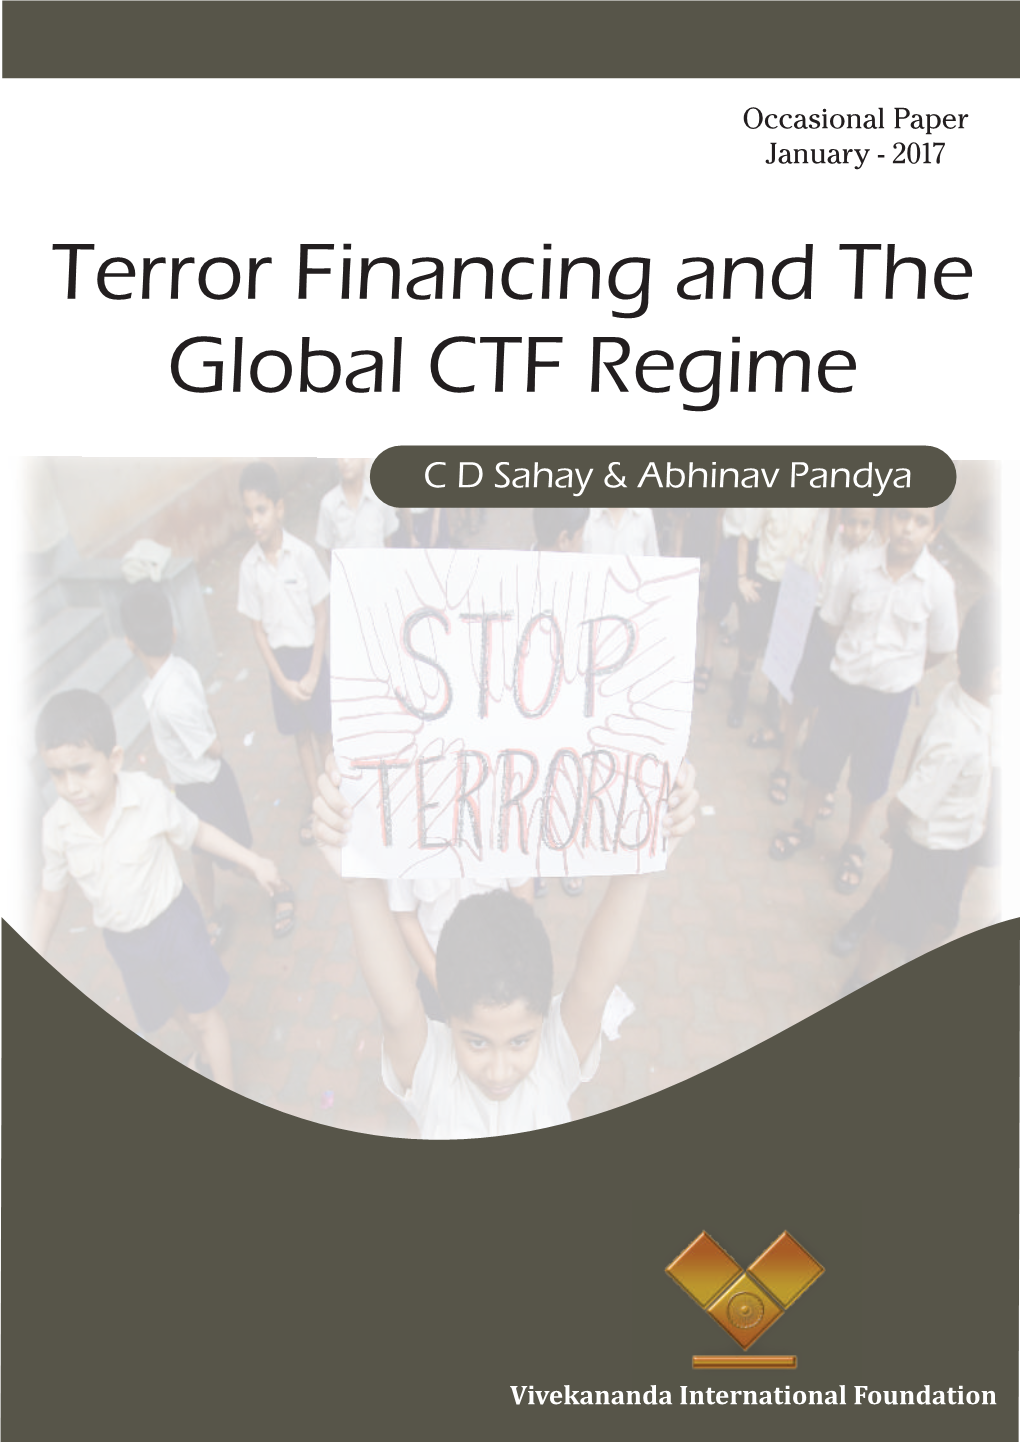 Terror Financing and the Global CTF Regime